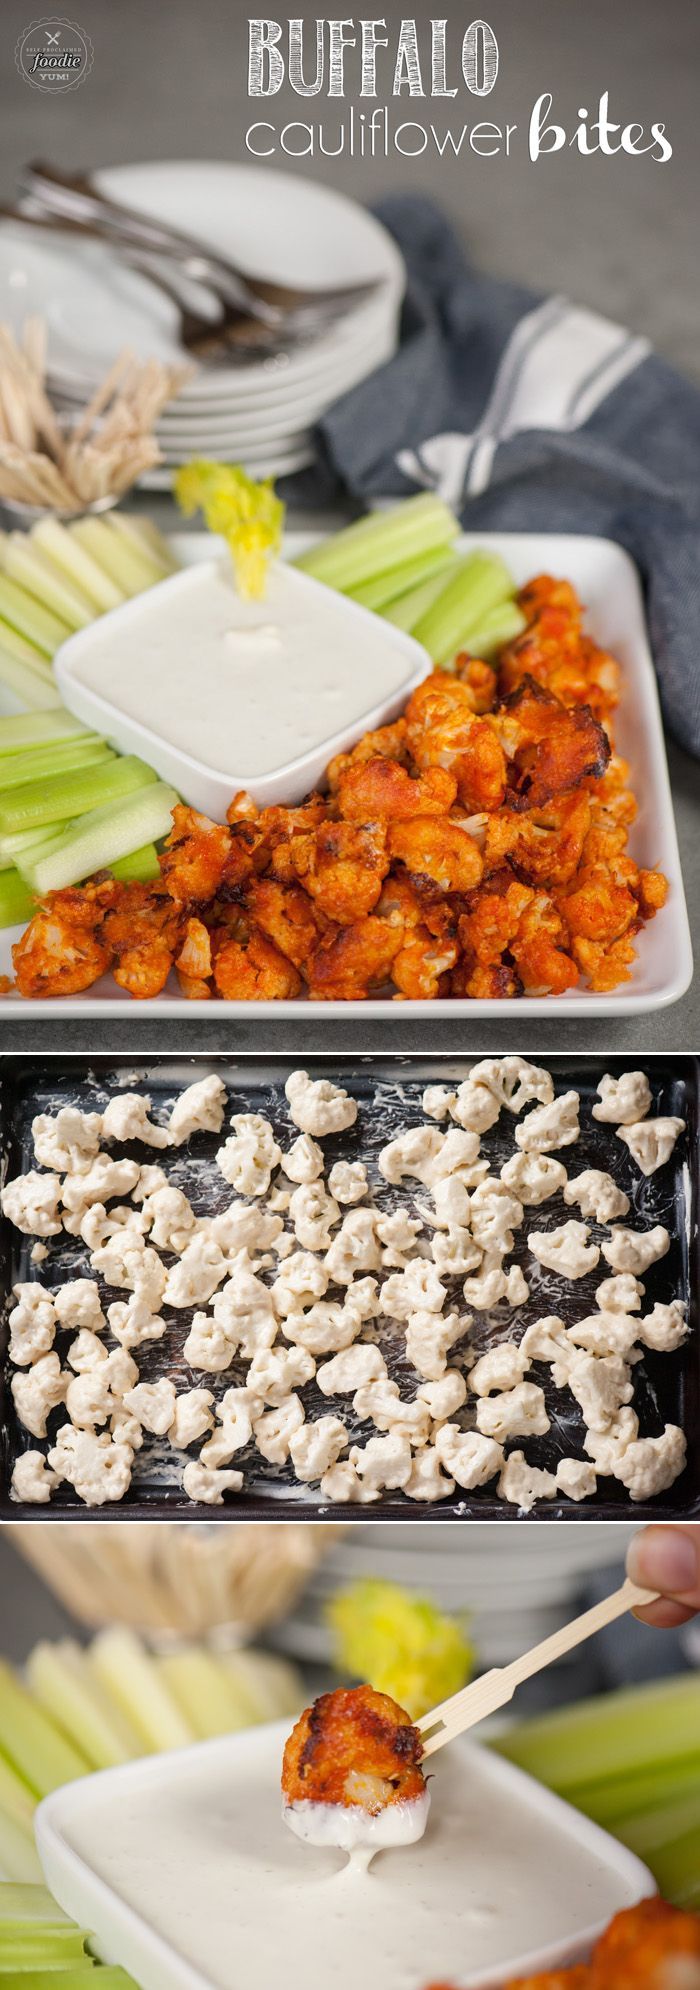 These Buffalo Cauliflower Bites taste so much like traditional chicken wings, but are a healthy vegetarian version perfect for a